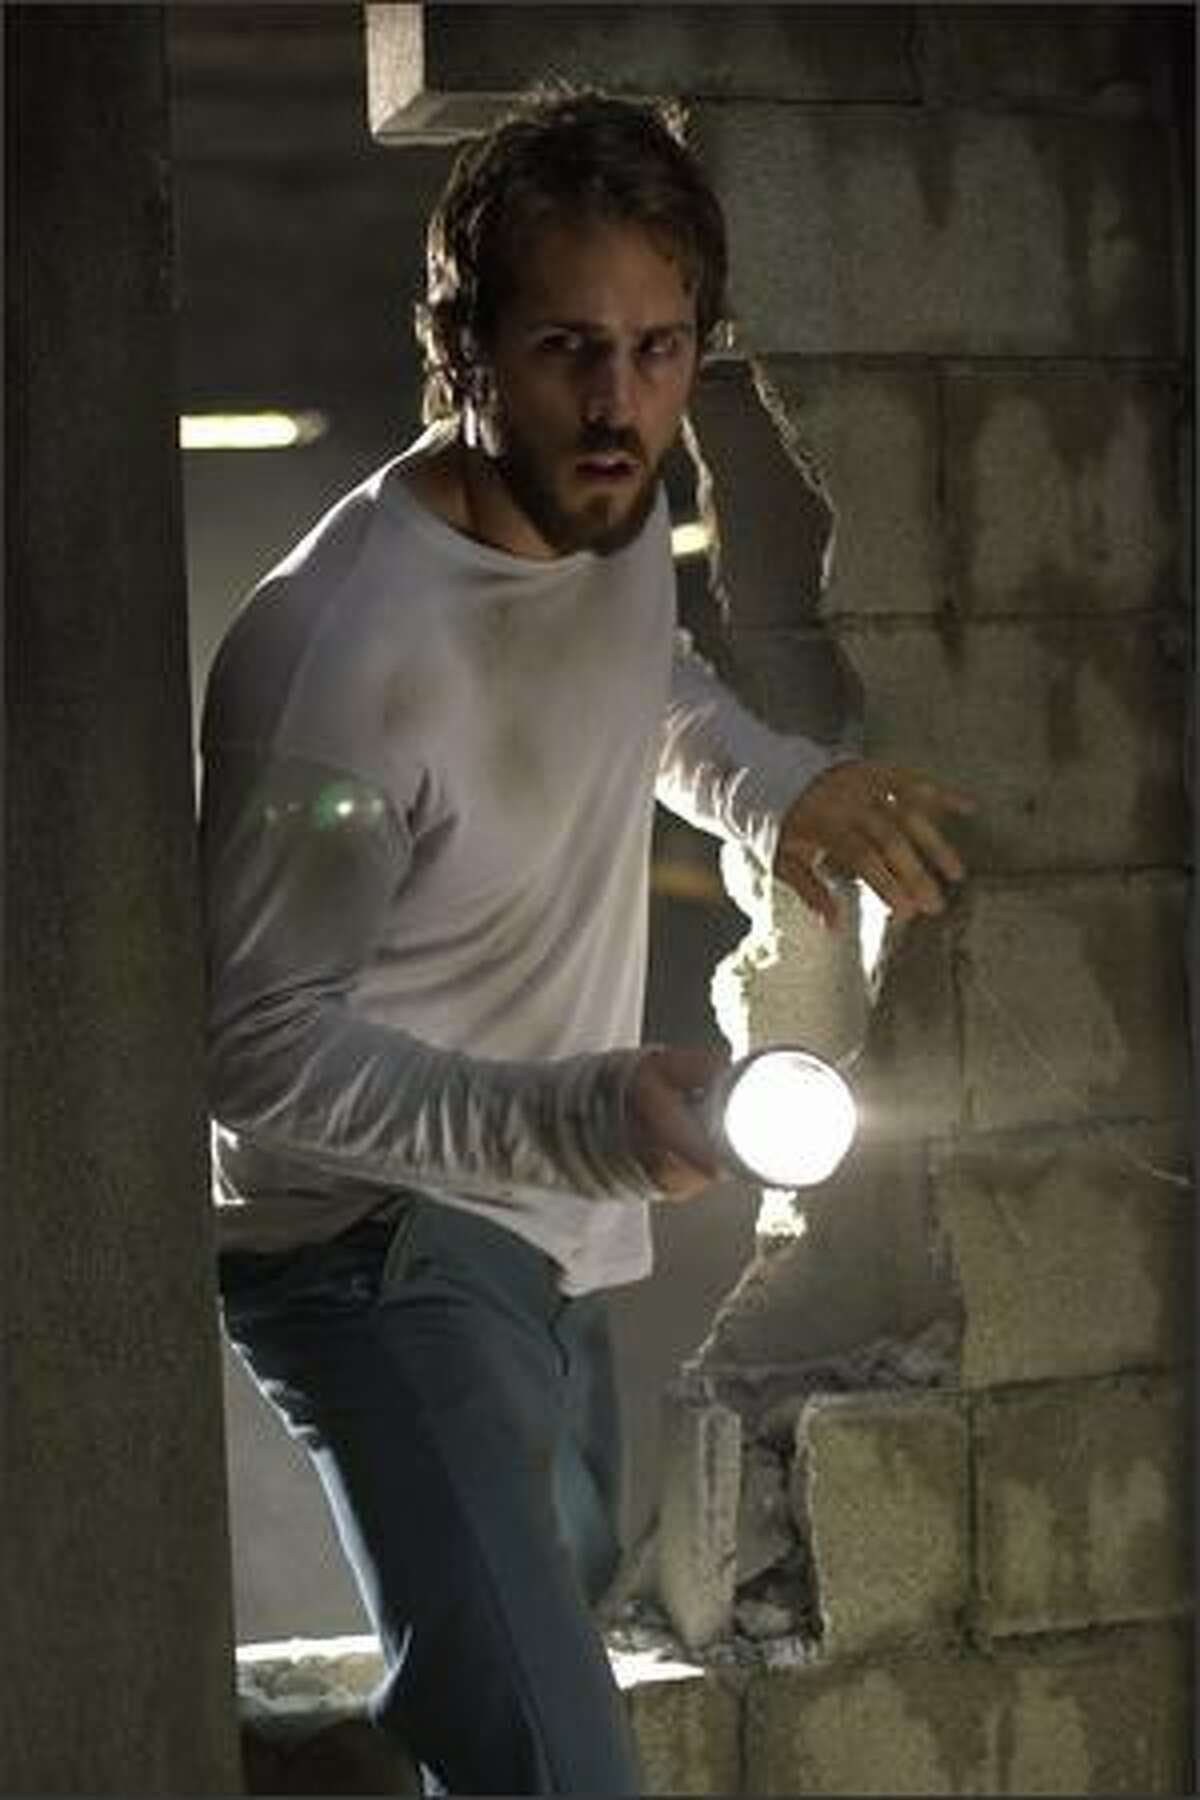 George Lutz (Ryan Reynolds) discovers a secret room in the basement.